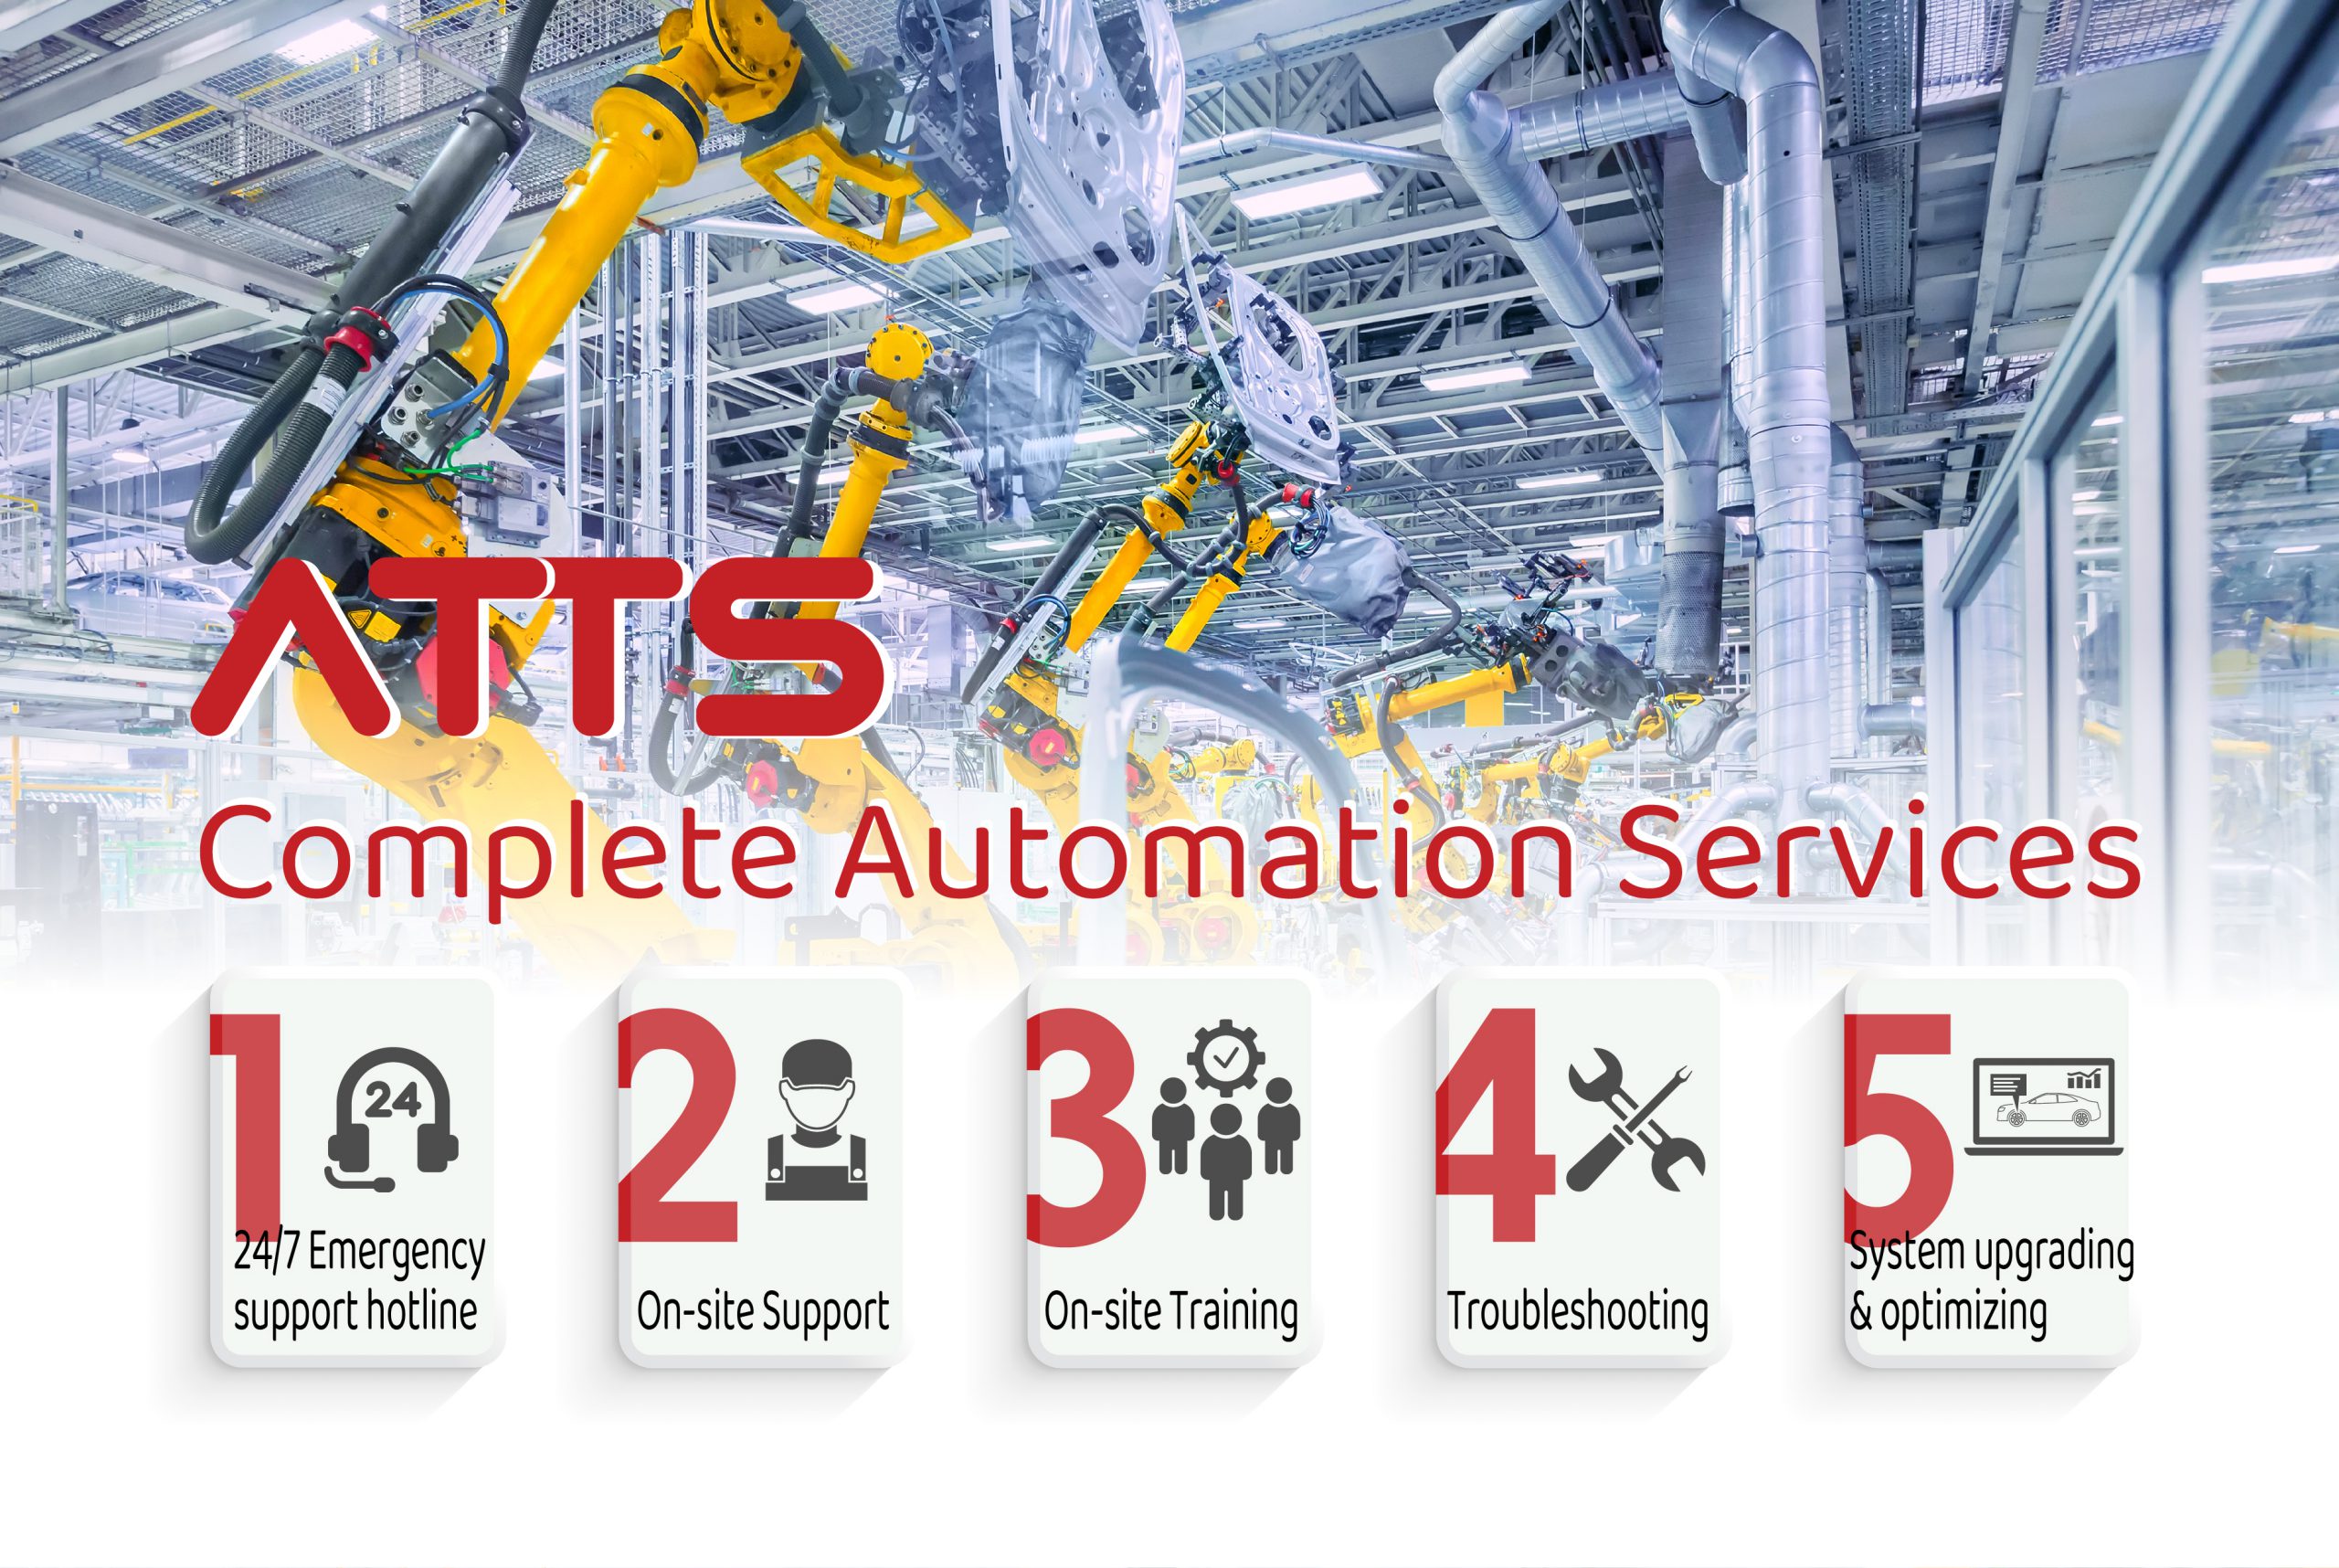 ATTS provides complete automation services for manufacturers to optimize their production lines.